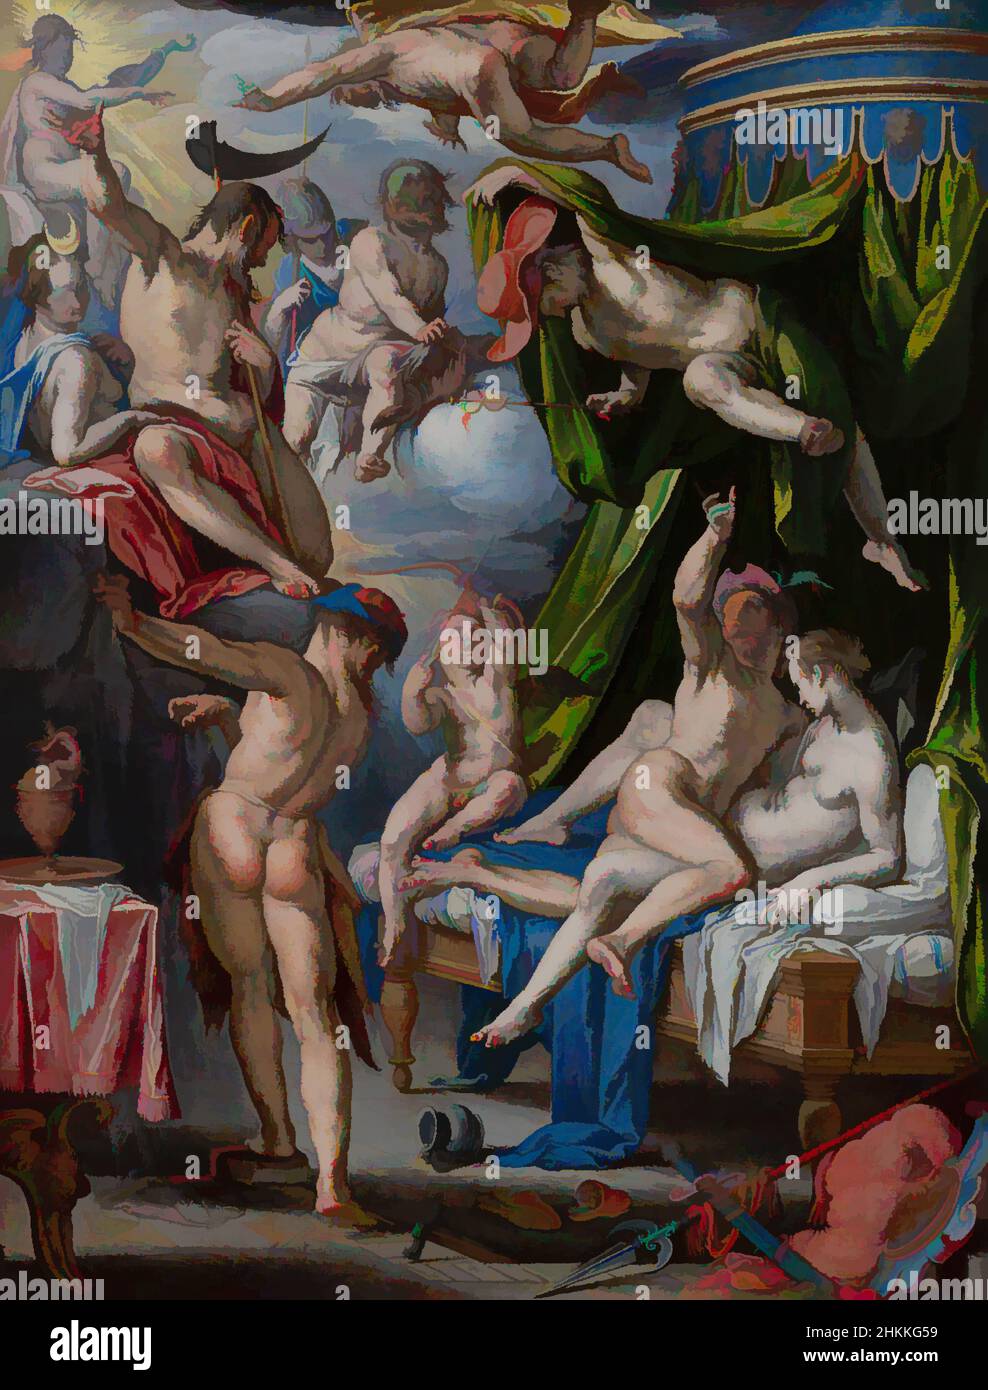 Art inspired by Mars and Venus caught by Vulcan, Joachim Wtewael, 1601, Classic works modernized by Artotop with a splash of modernity. Shapes, color and value, eye-catching visual impact on art. Emotions through freedom of artworks in a contemporary way. A timeless message pursuing a wildly creative new direction. Artists turning to the digital medium and creating the Artotop NFT Stock Photo